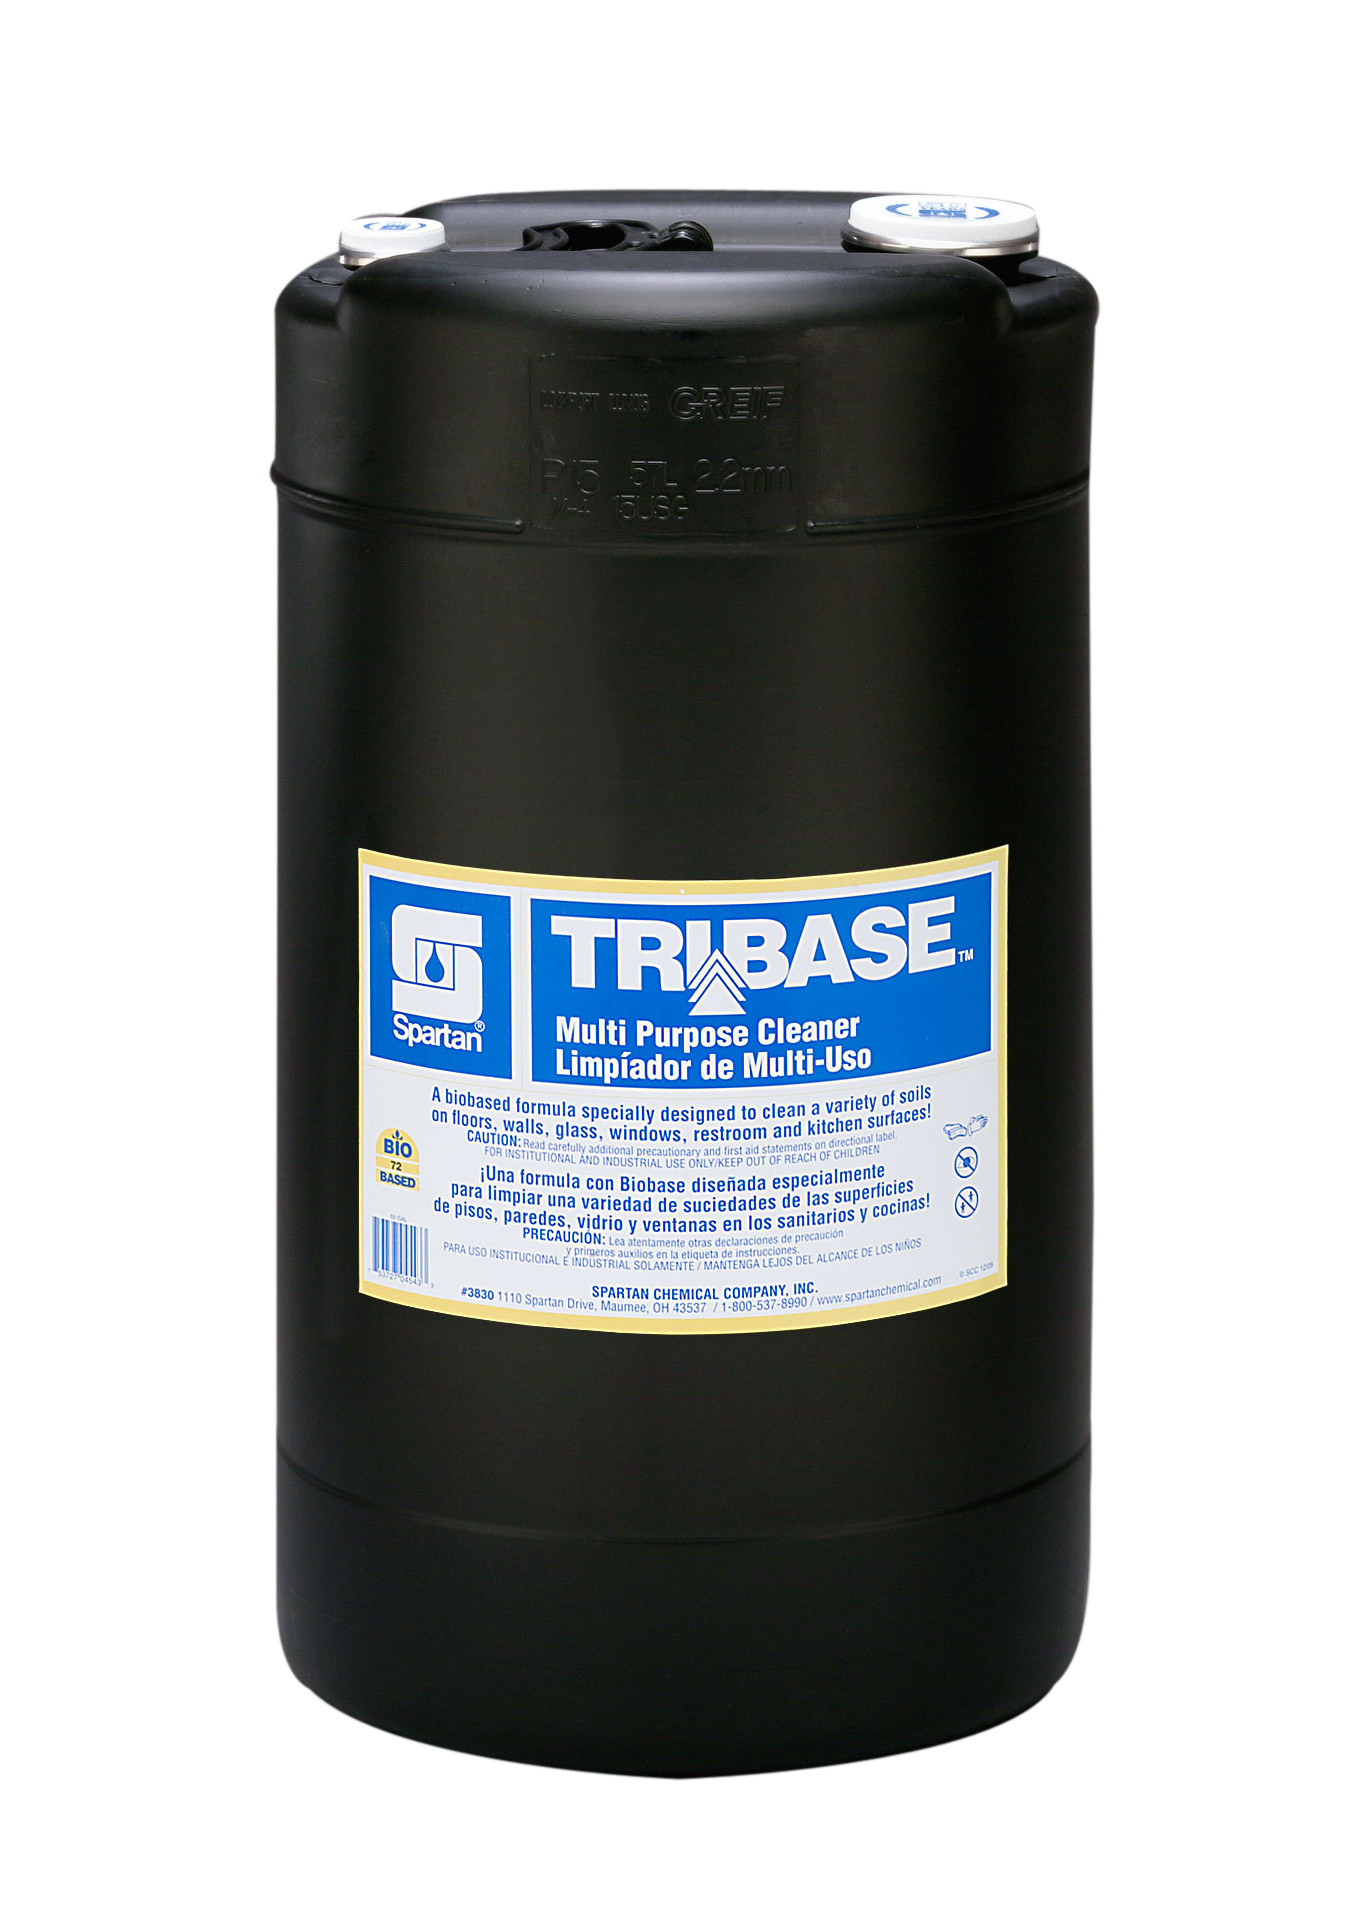 Spartan Chemical Company TriBase Multi Purpose Cleaner, 15 GAL DRUM